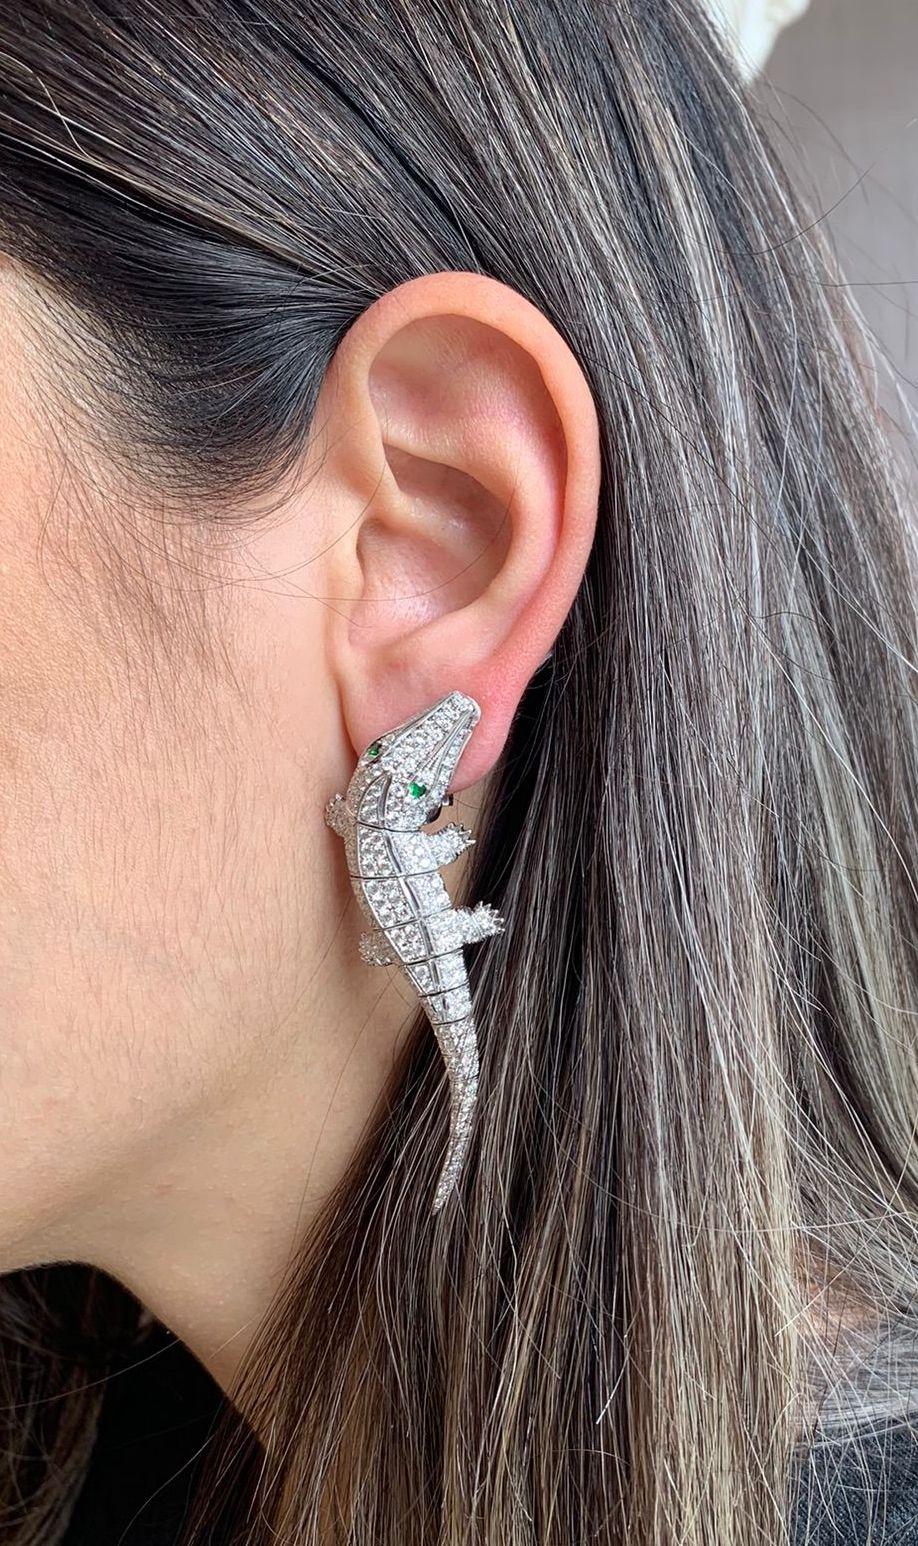 18 Karat white gold 'Another World' limited edition Crocodile earring created by Monan with 4.98 carats of round brilliant cut diamonds and 0.18 carats of emeralds. 
 ‘Another World’ is a magical Monan Dreamworld, inhabited by extinct animals who